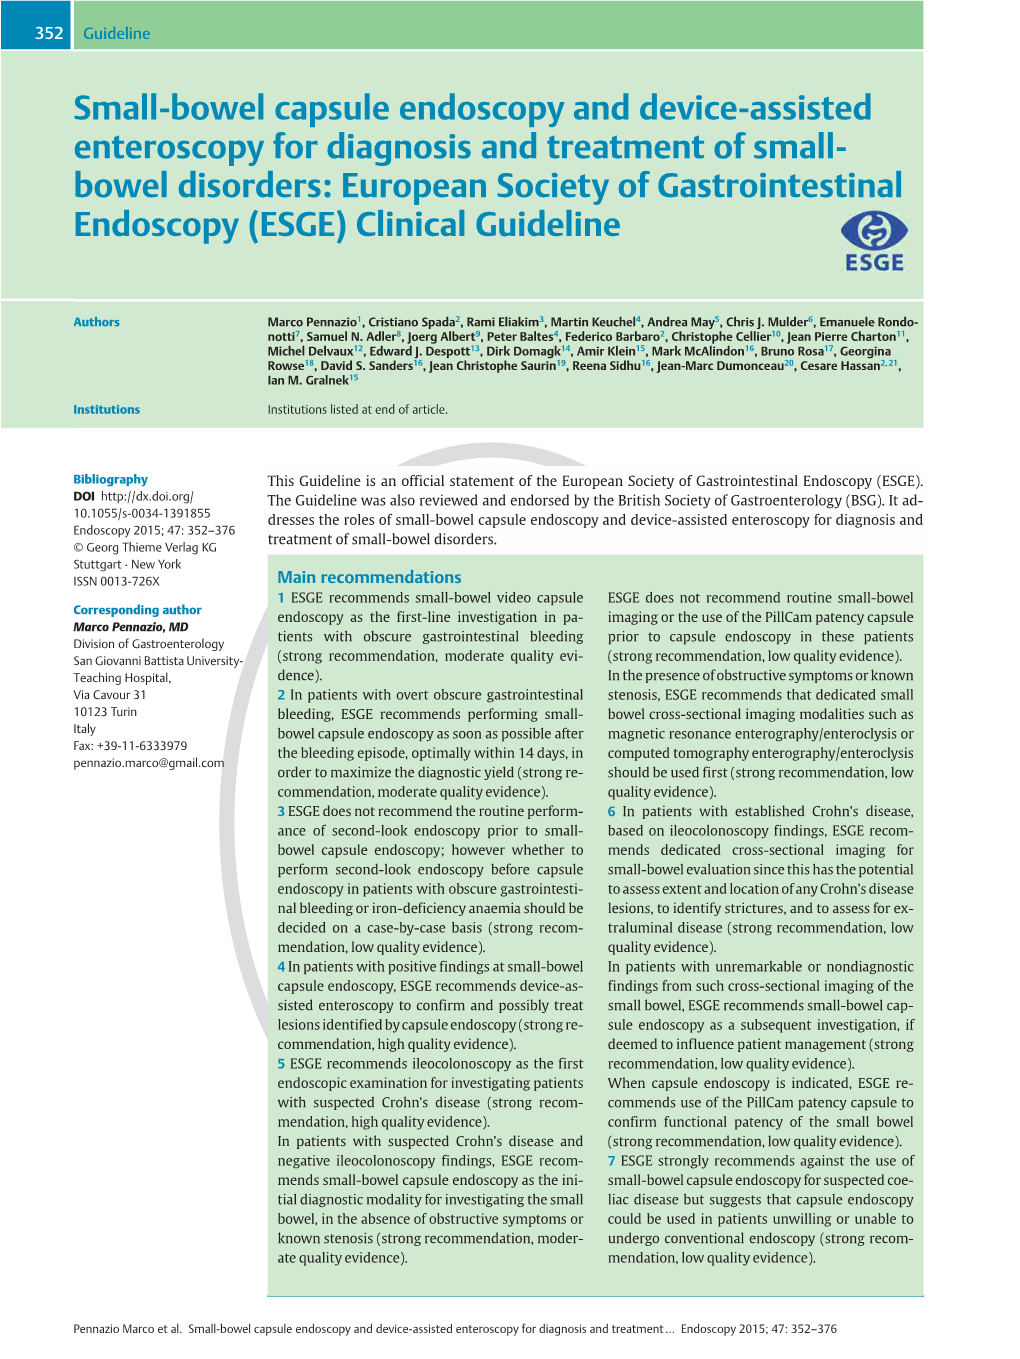 Small-Bowel Capsule Endoscopy and Device-Assisted Enteroscopy For